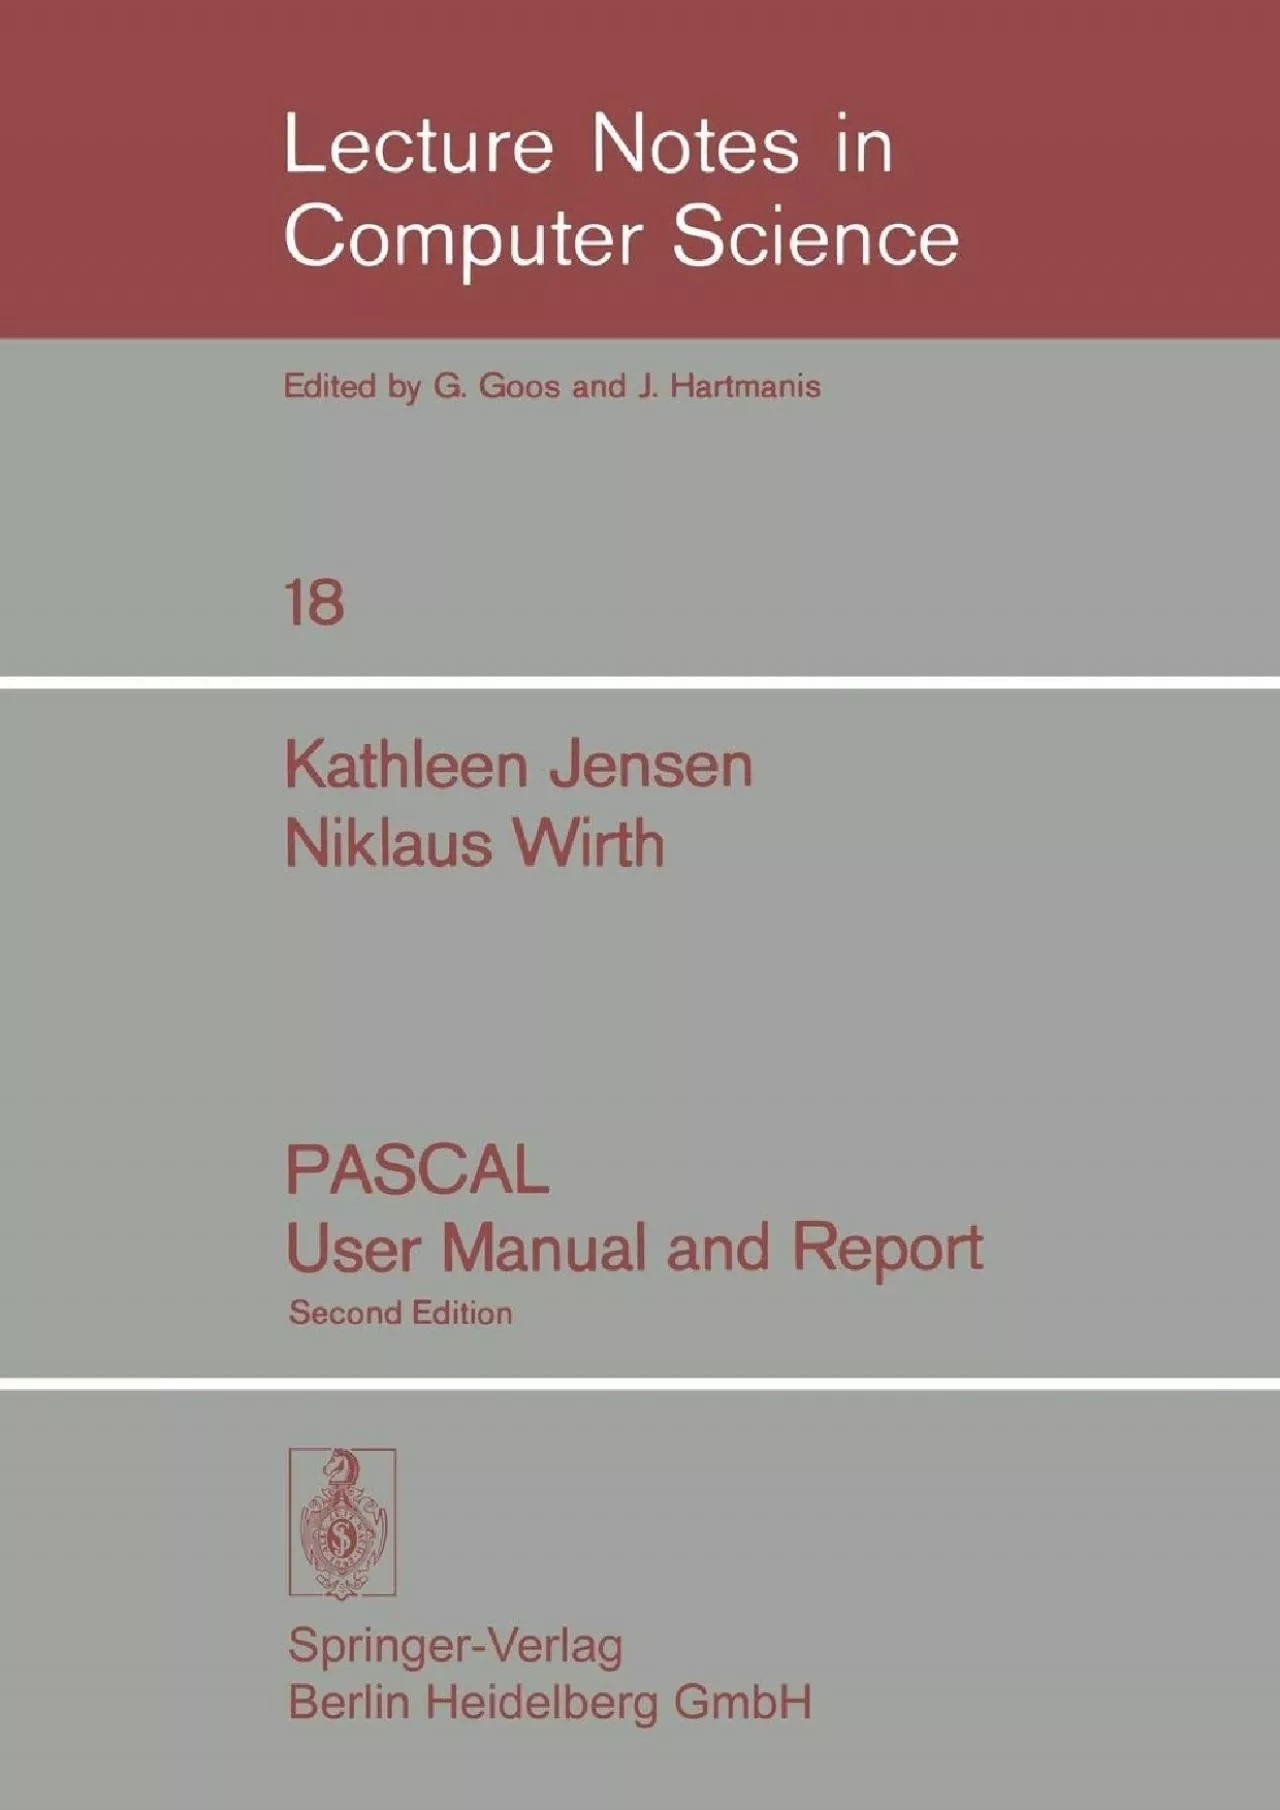 [FREE]-PASCAL User Manual and Report (Lecture Notes in Computer Science, 18)